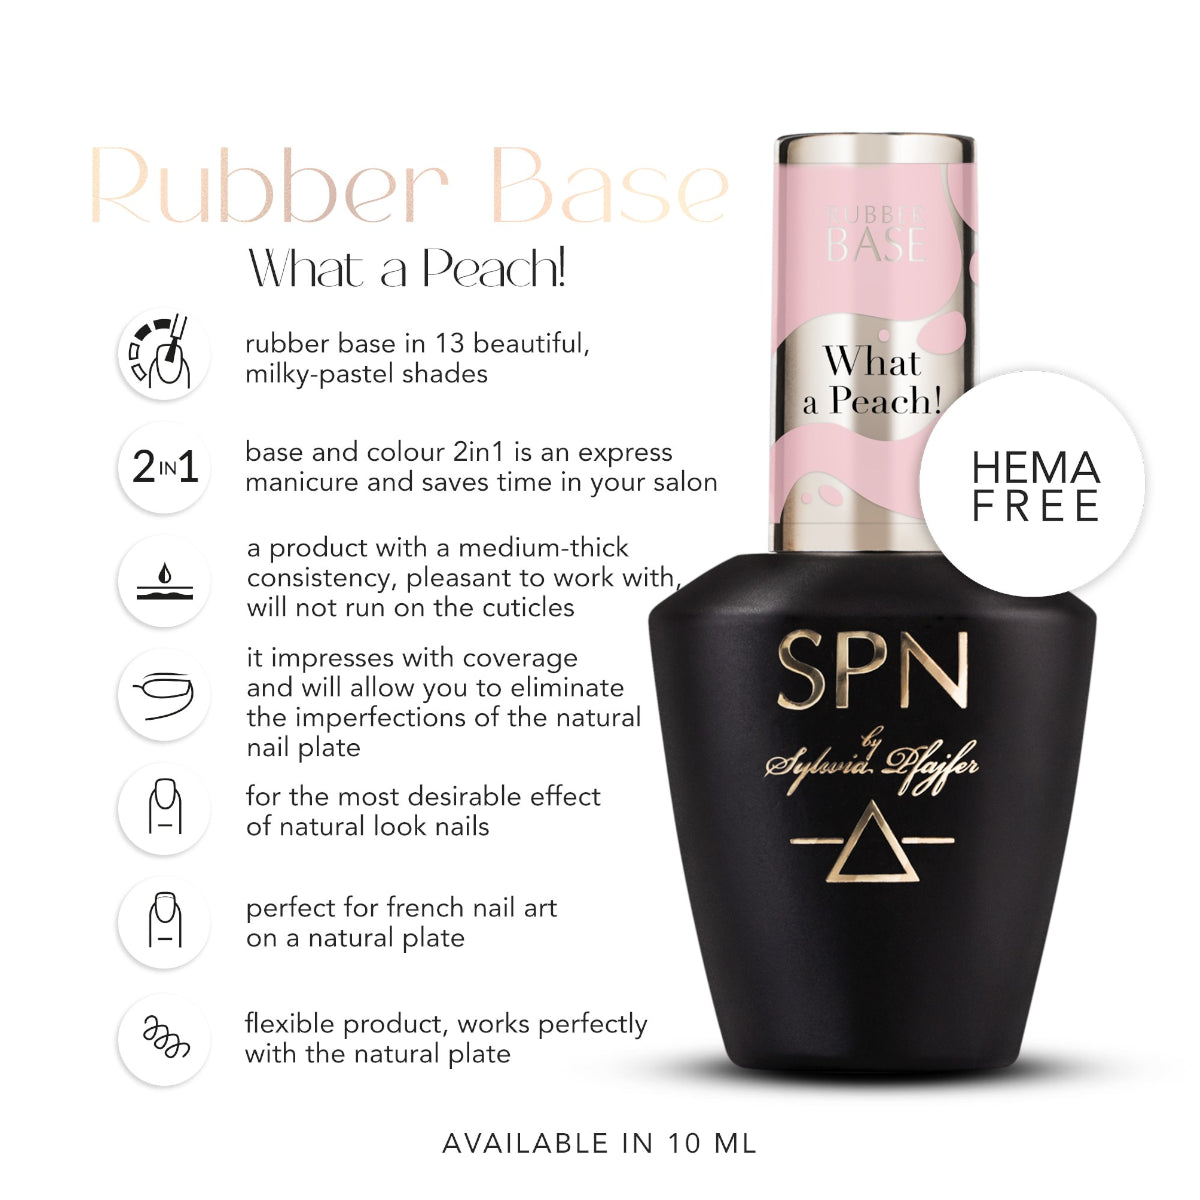 SPN Nails Rubber Base COLOR & GO! What a Peach! Hema Free